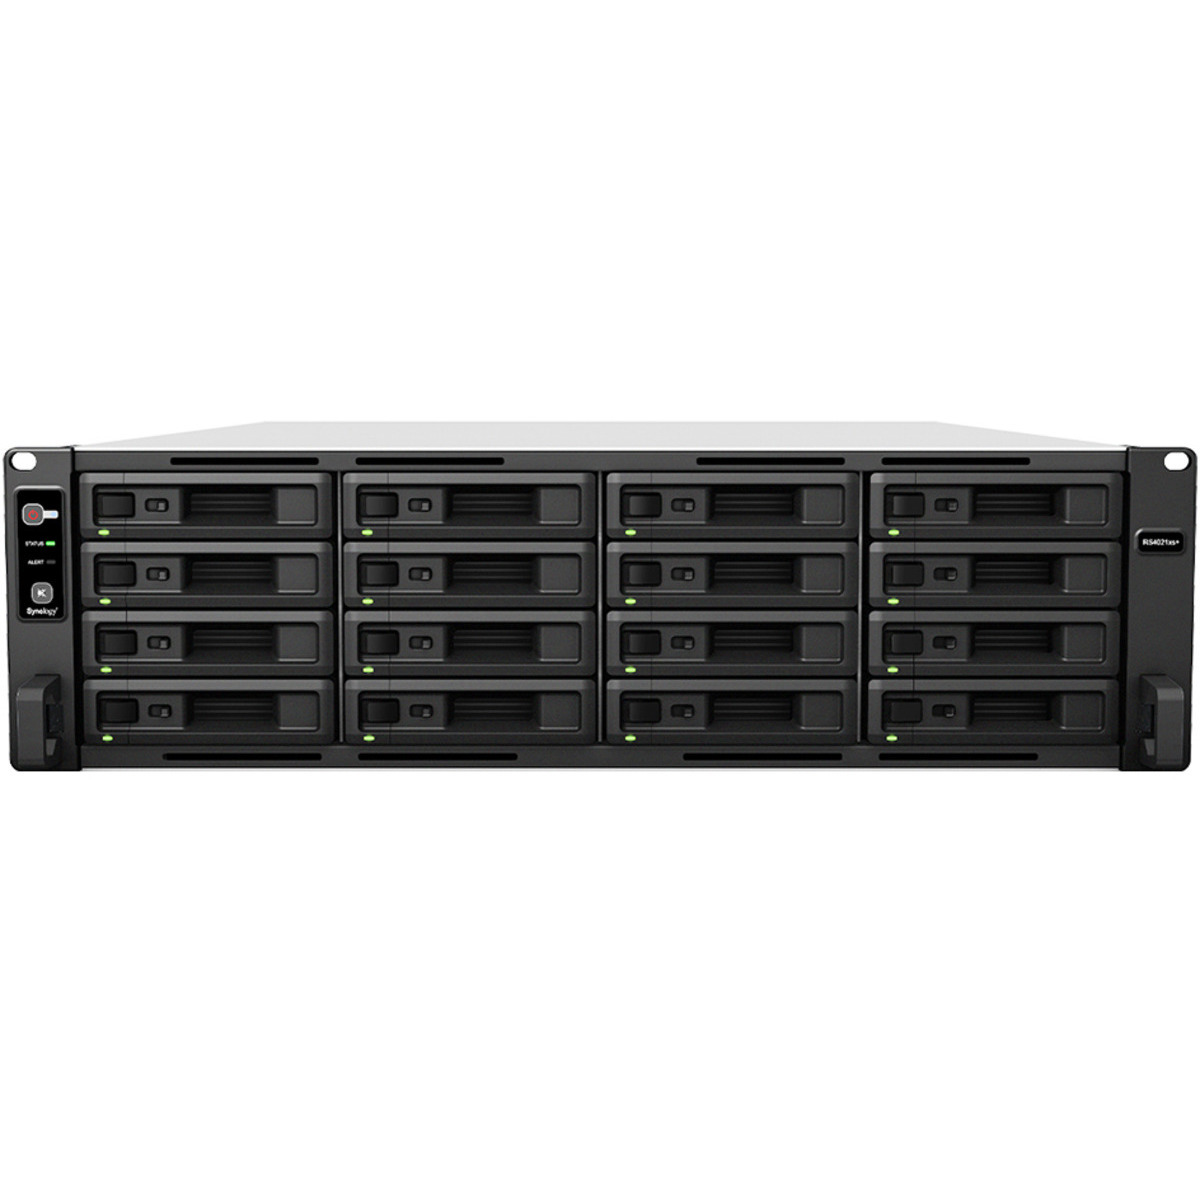 buy $10847 Synology RackStation RS4021xs+ 128tb RackMount NAS - Network Attached Storage Device 16x8000gb Western Digital Ultrastar DC HC320 HUS728T8TALE6L4 3.5 7200rpm SATA 6Gb/s HDD ENTERPRISE Class Drives Installed - Burn-In Tested - nas headquarters buy network attached storage server device das new raid-5 free shipping usa christmas new year holiday sale RackStation RS4021xs+